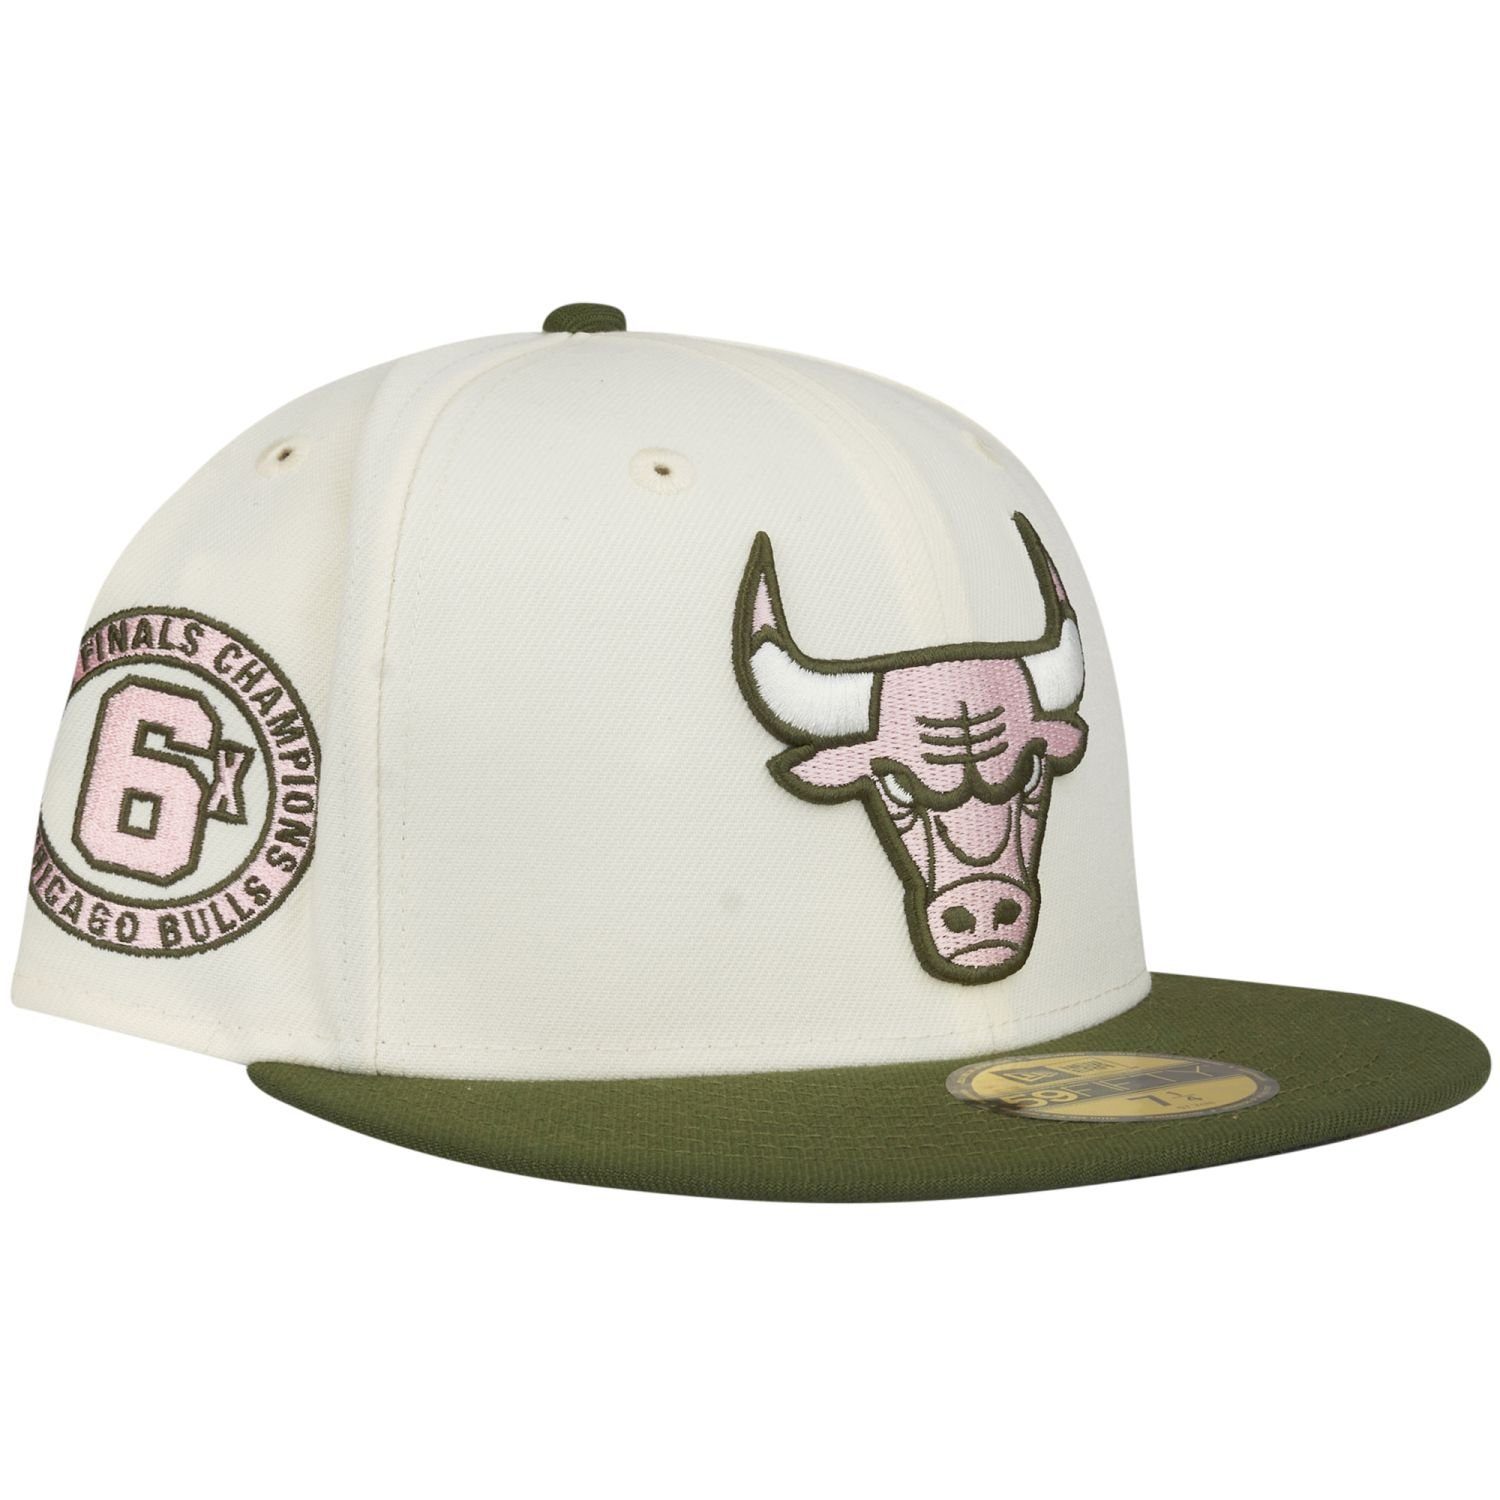 New Era Fitted Cap 59Fifty Chicago Bulls